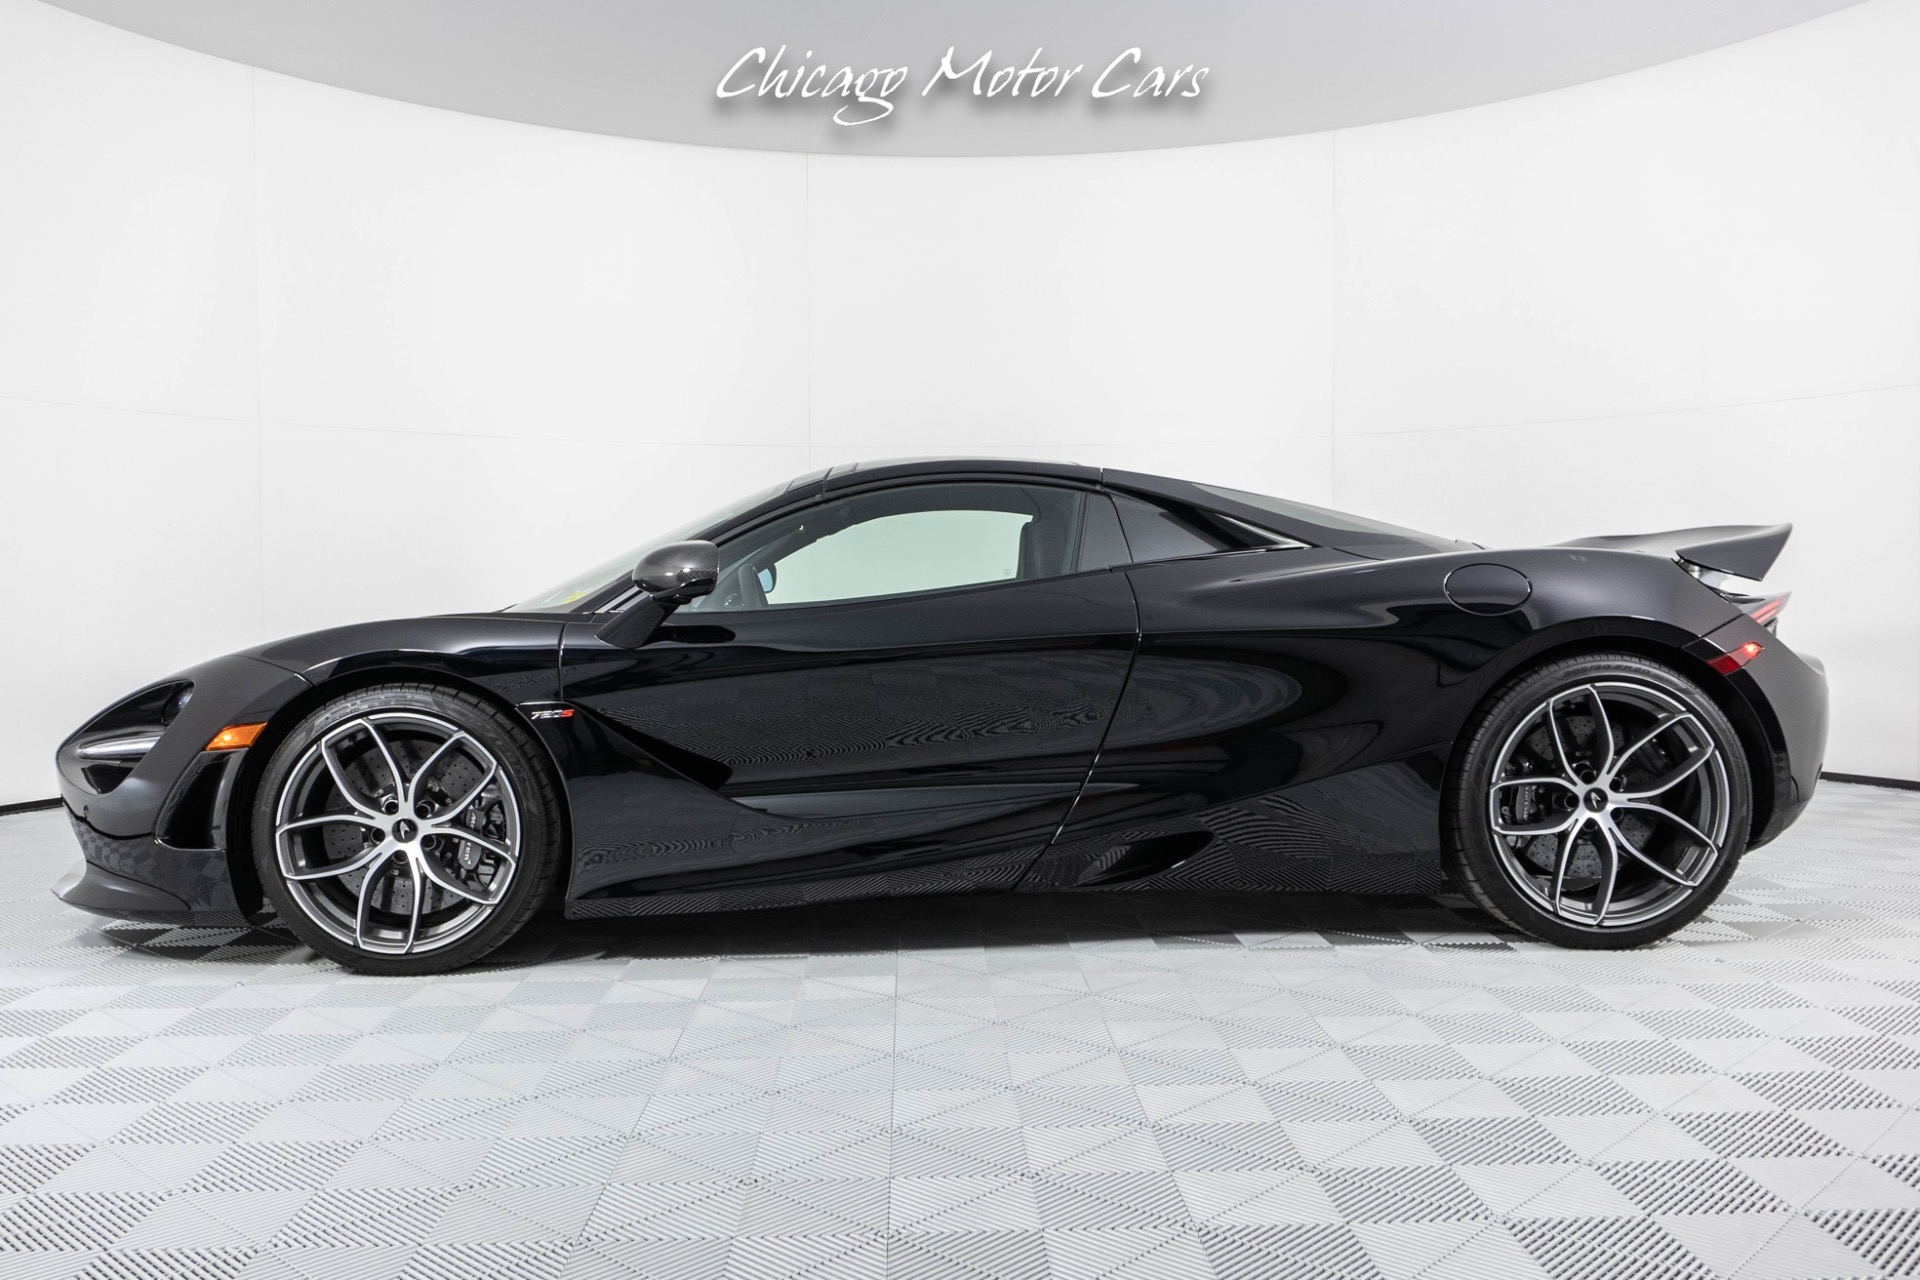 Used-2020-McLaren-720S-PERFORMANCE-SPIDER-RARE-MSO-BOREALIS-BLACK-385K-MSRP-SPORT-EXHAUST-ELECTROCHROMATIC-ROOF